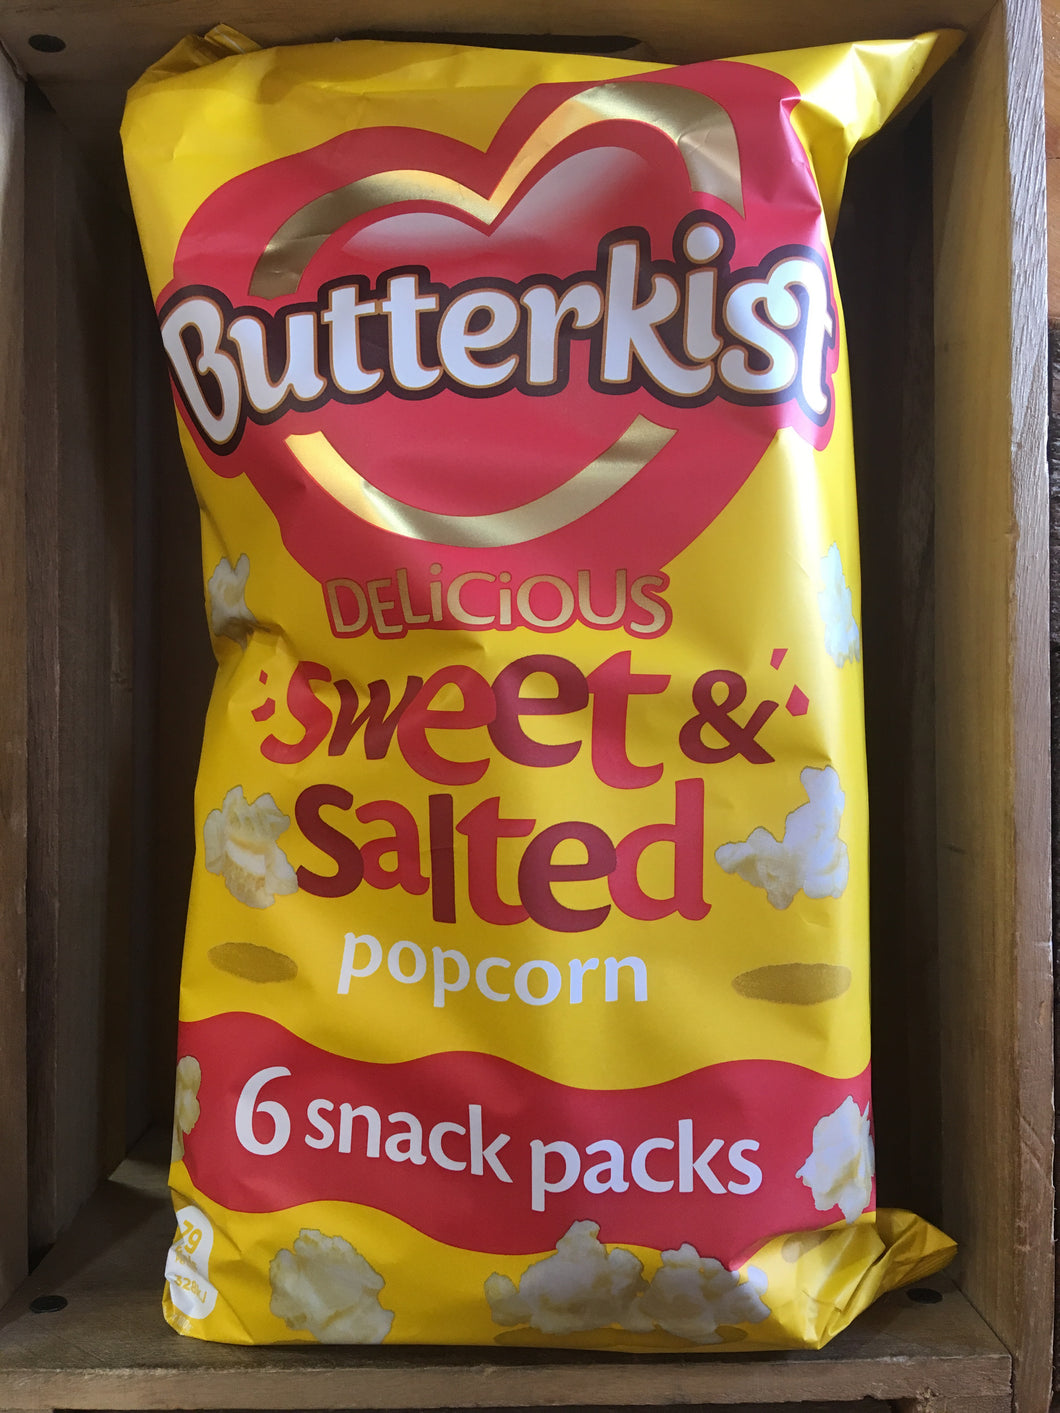 Butterkist Delicious Sweet & Salted Popcorn 6 Pack (6x15g)